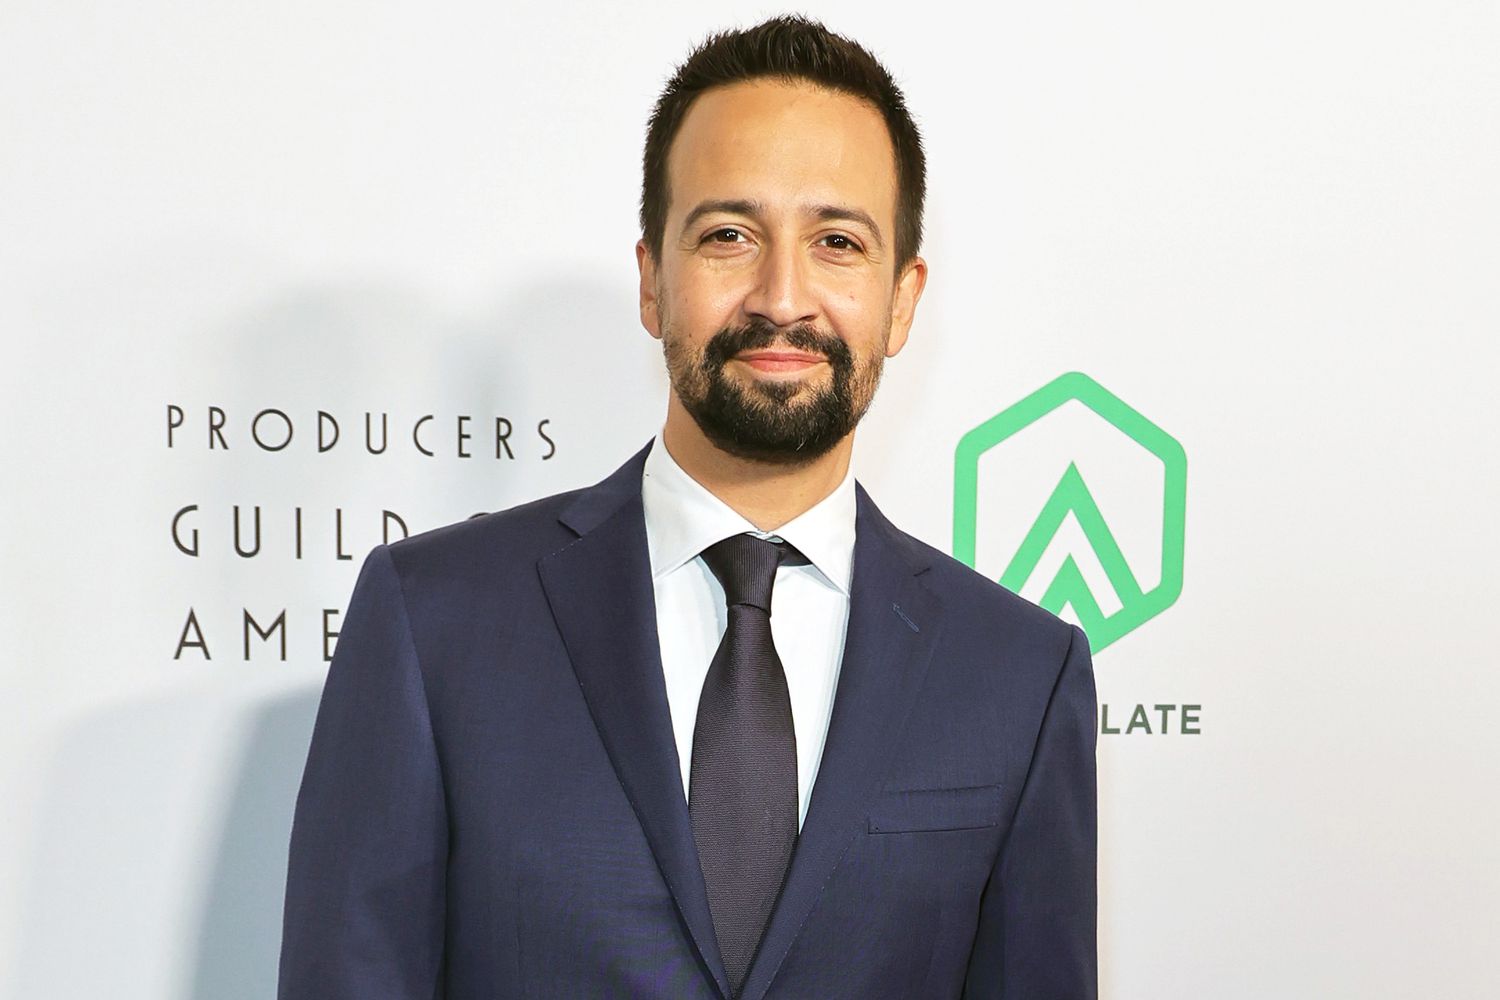 Lin-Manuel Miranda responds to 'illegal, unauthorized production' of 'Hamilton' at Texas church - Entertainment Weekly News